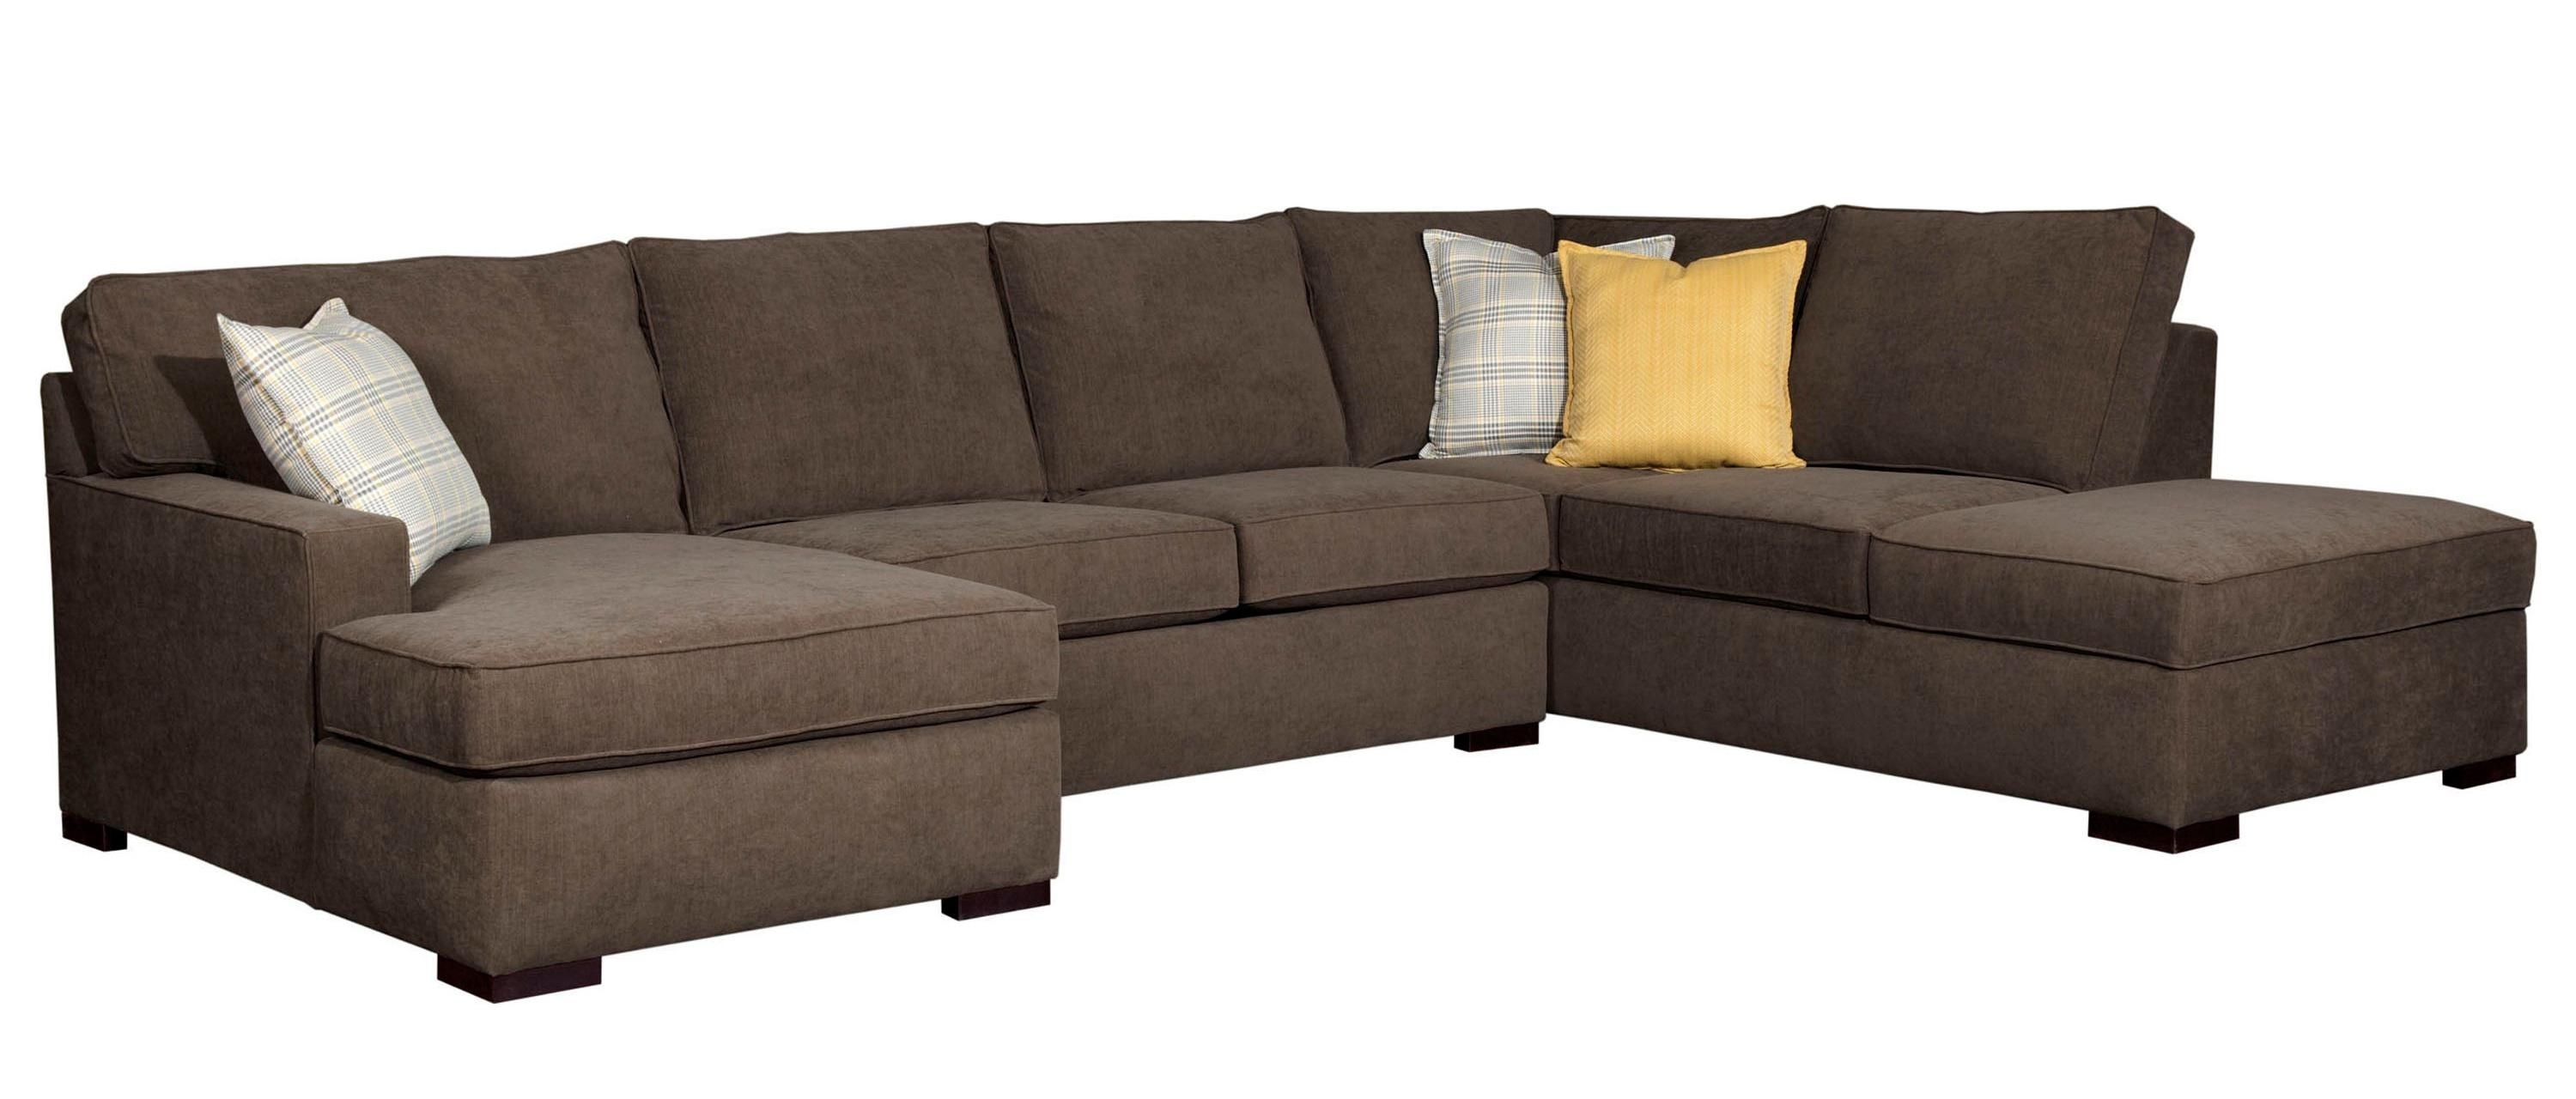 Broyhill Furniture Raphael Contemporary Sectional Sofa With Laf For Meyer 3 Piece Sectionals With Laf Chaise (View 7 of 30)